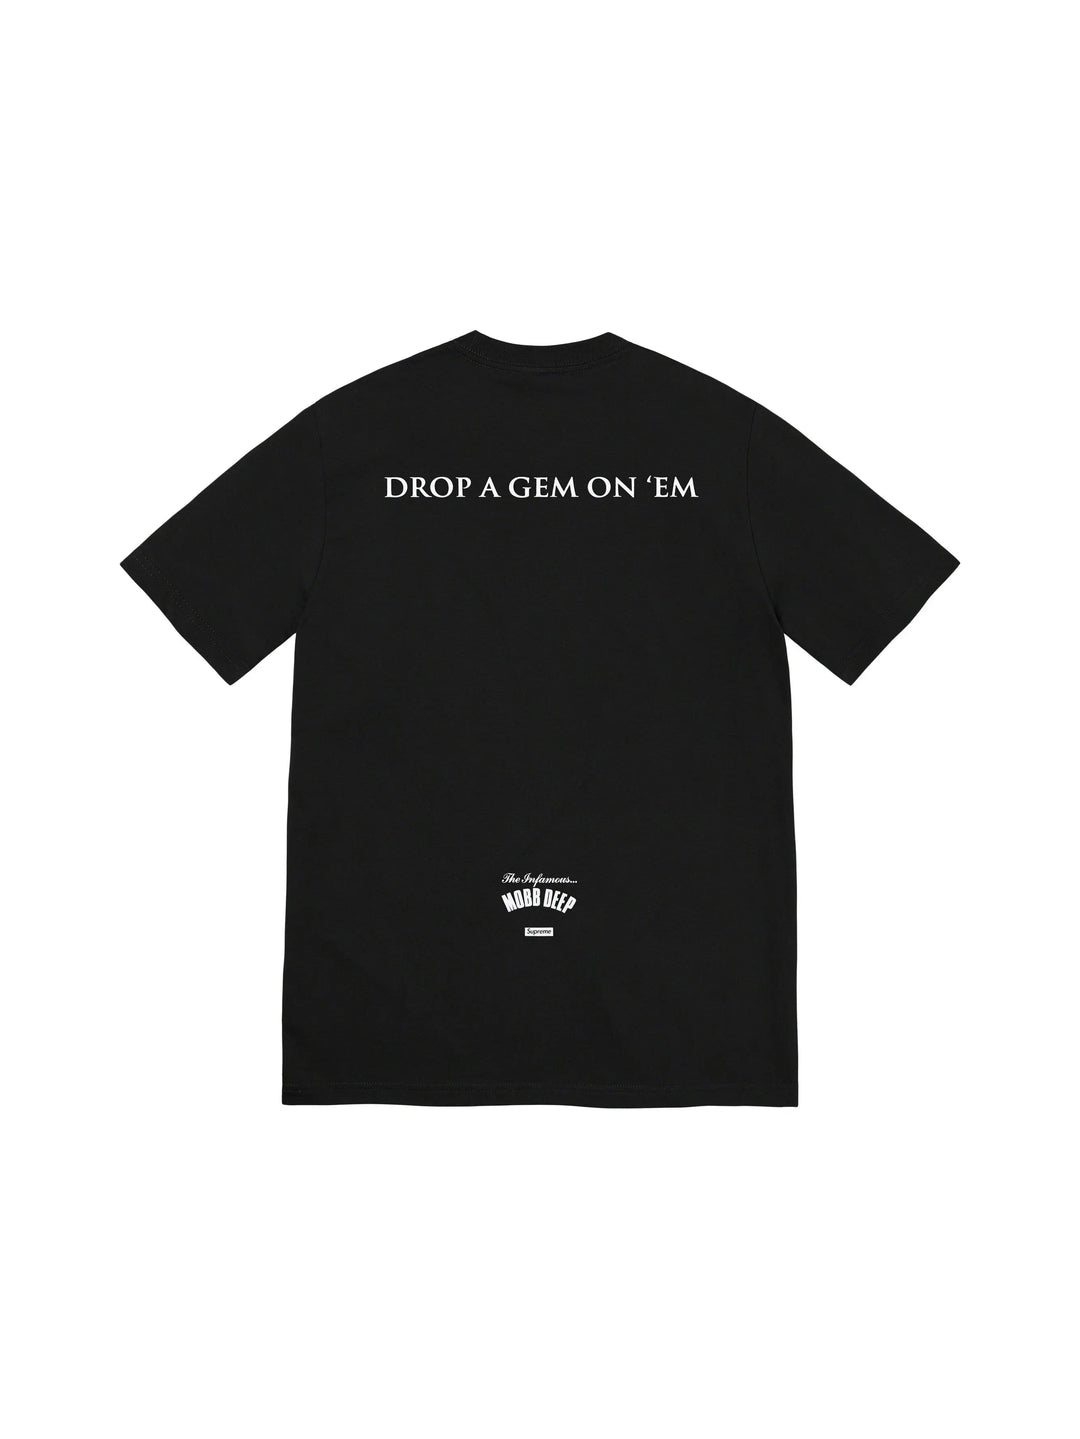 Supreme Mobb Deep Dragon Tee Black in Auckland, New Zealand - Shop name